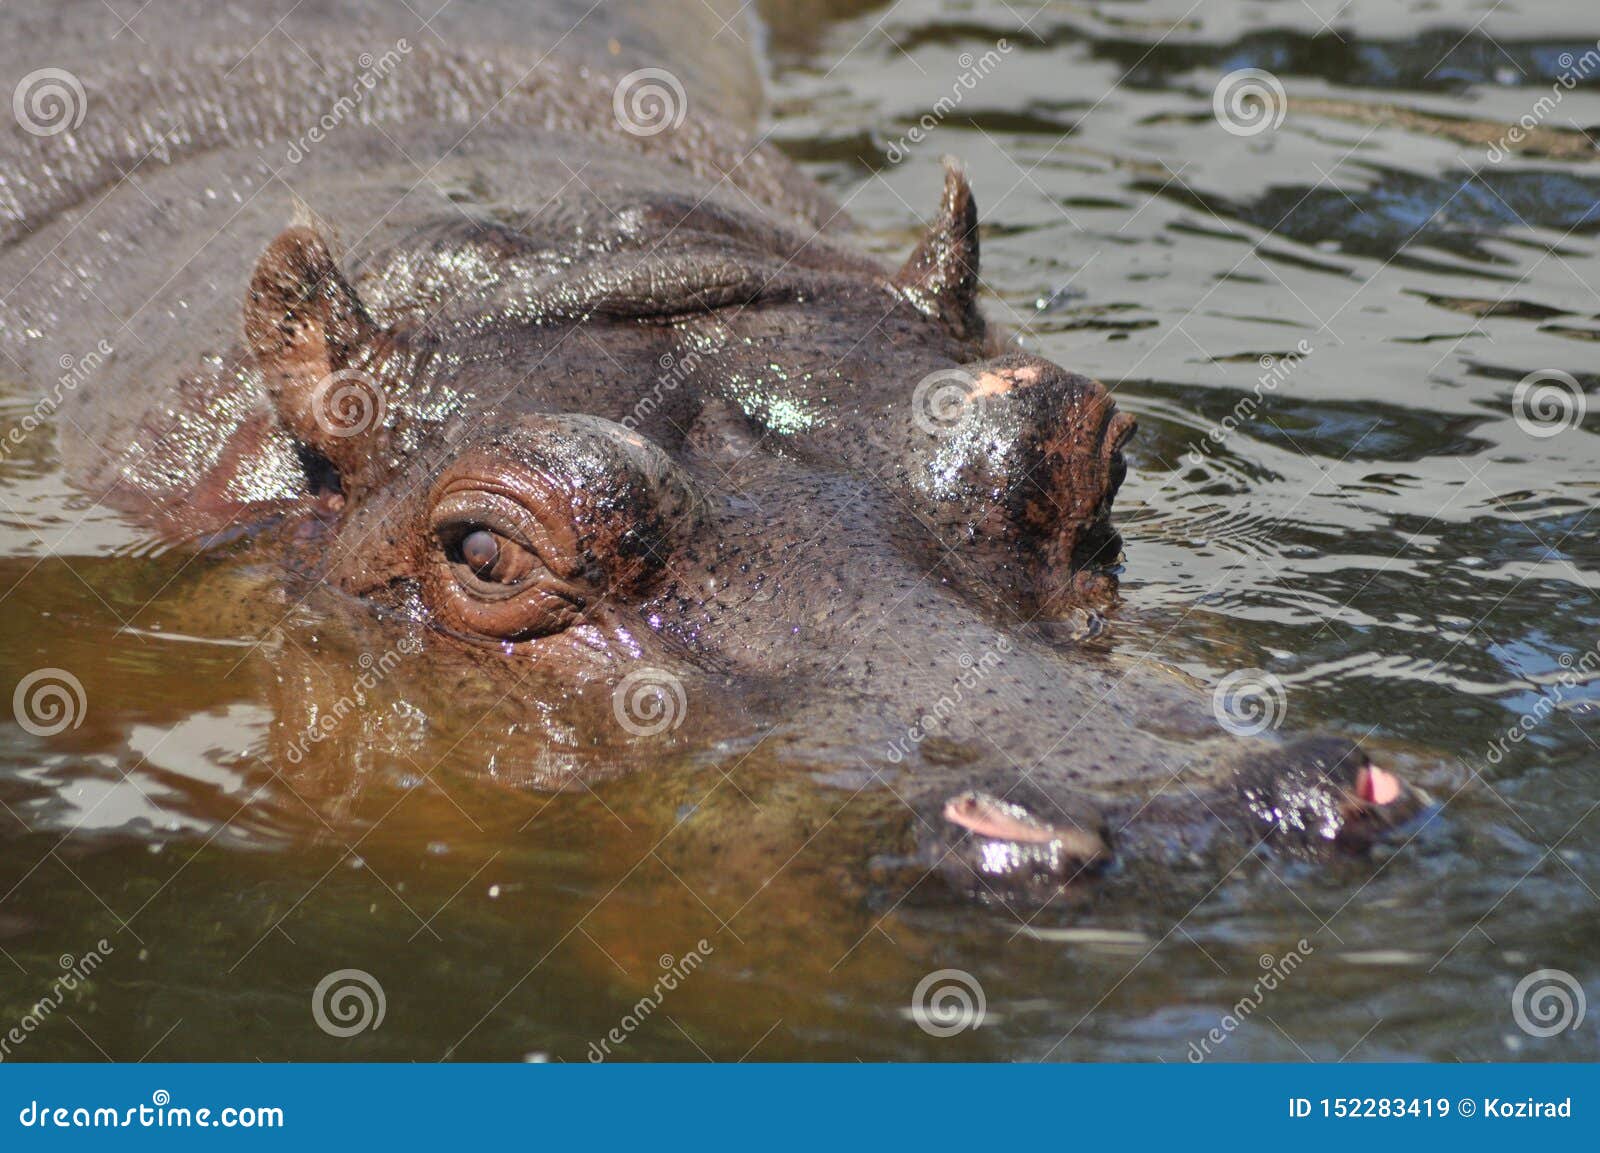 Hippo. Floating in the Water a Large Animal Living in Africa Stock Image -  Image of culture, weight: 152283419